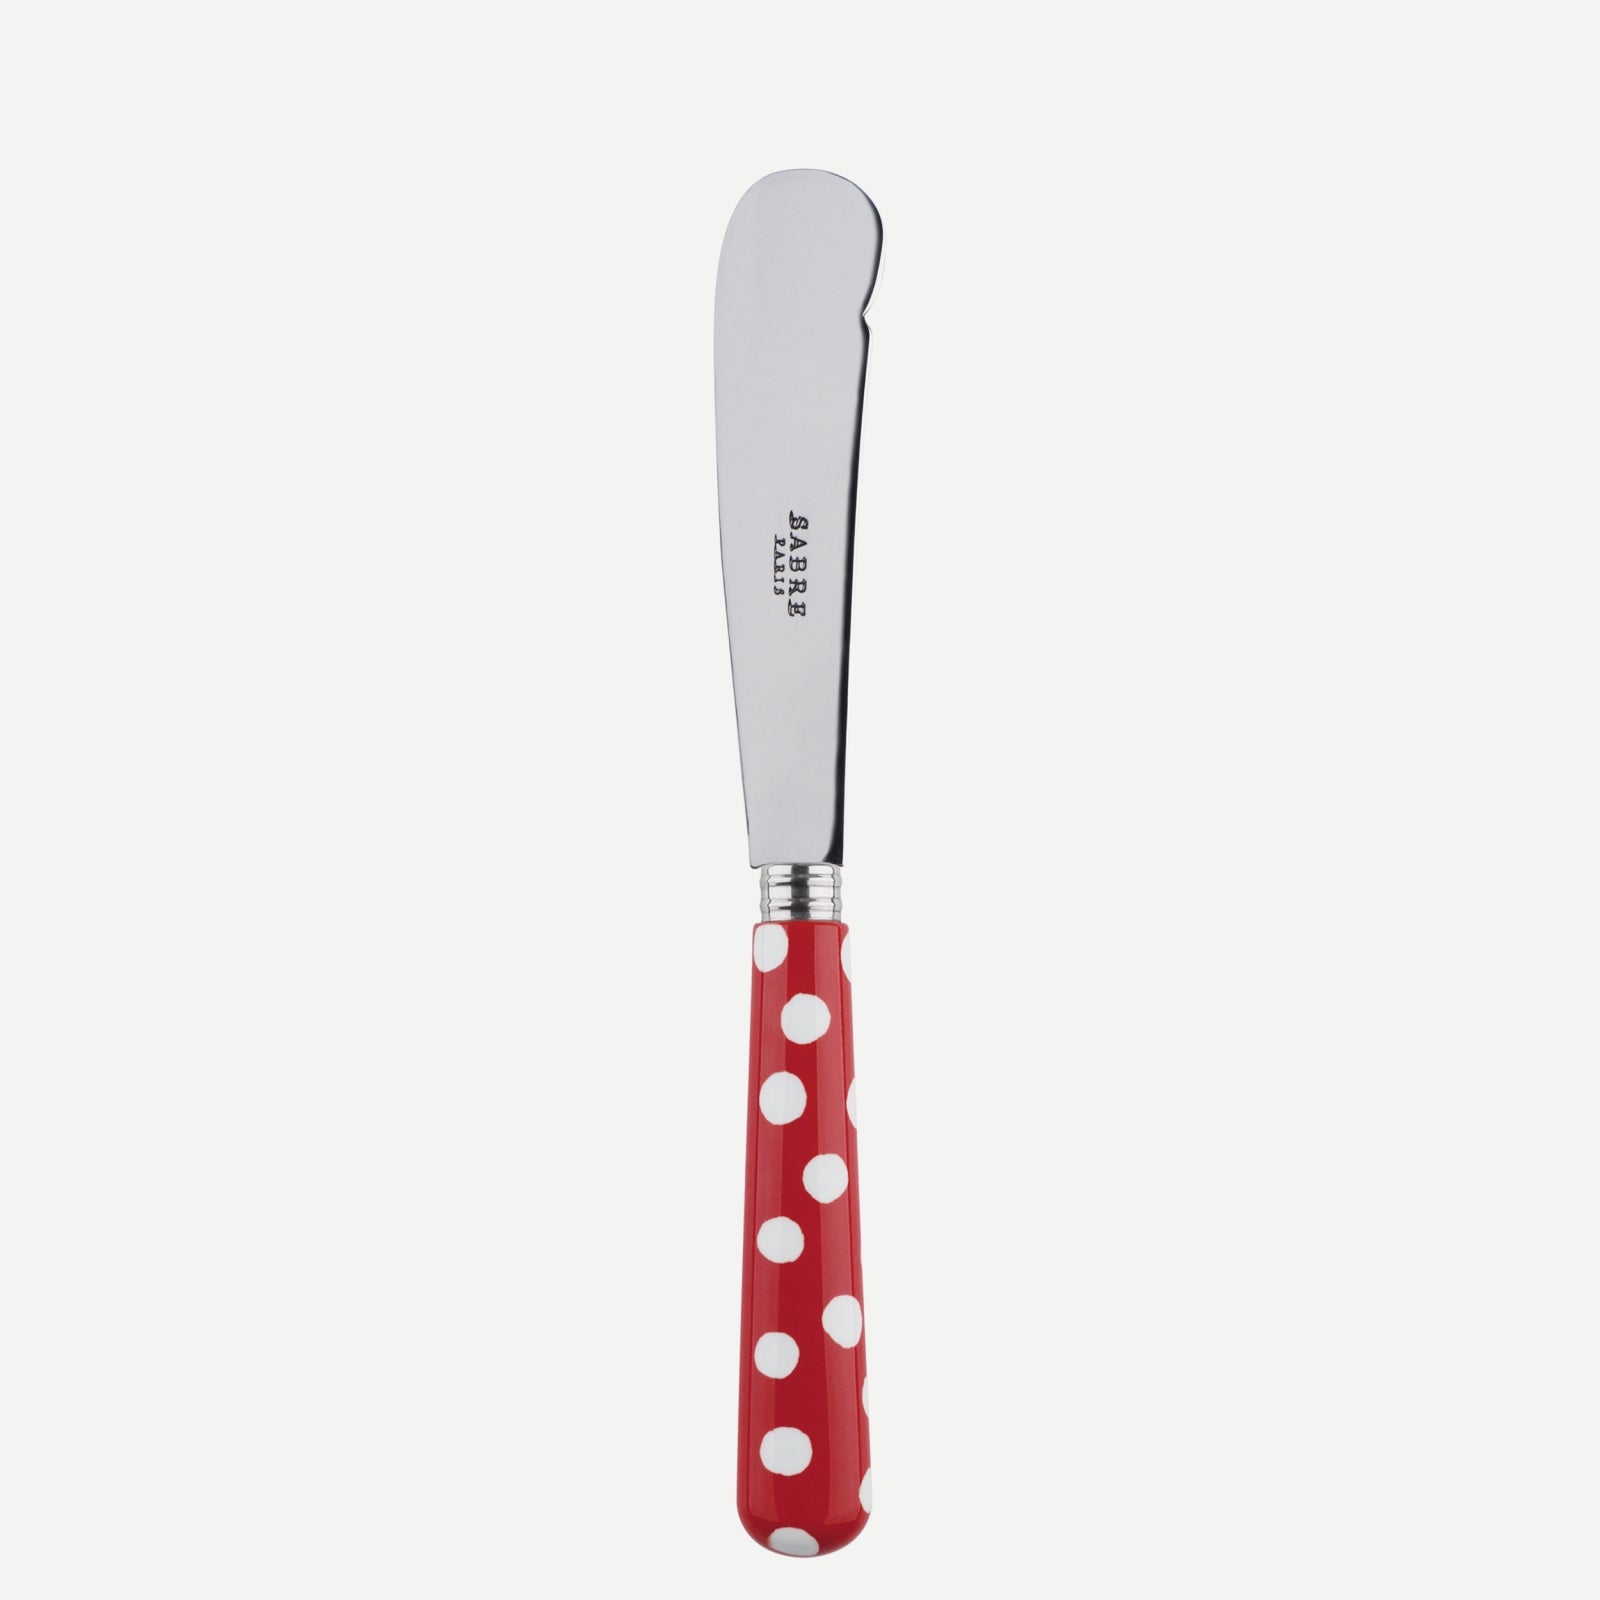 Butter knife - White Dots. - Red